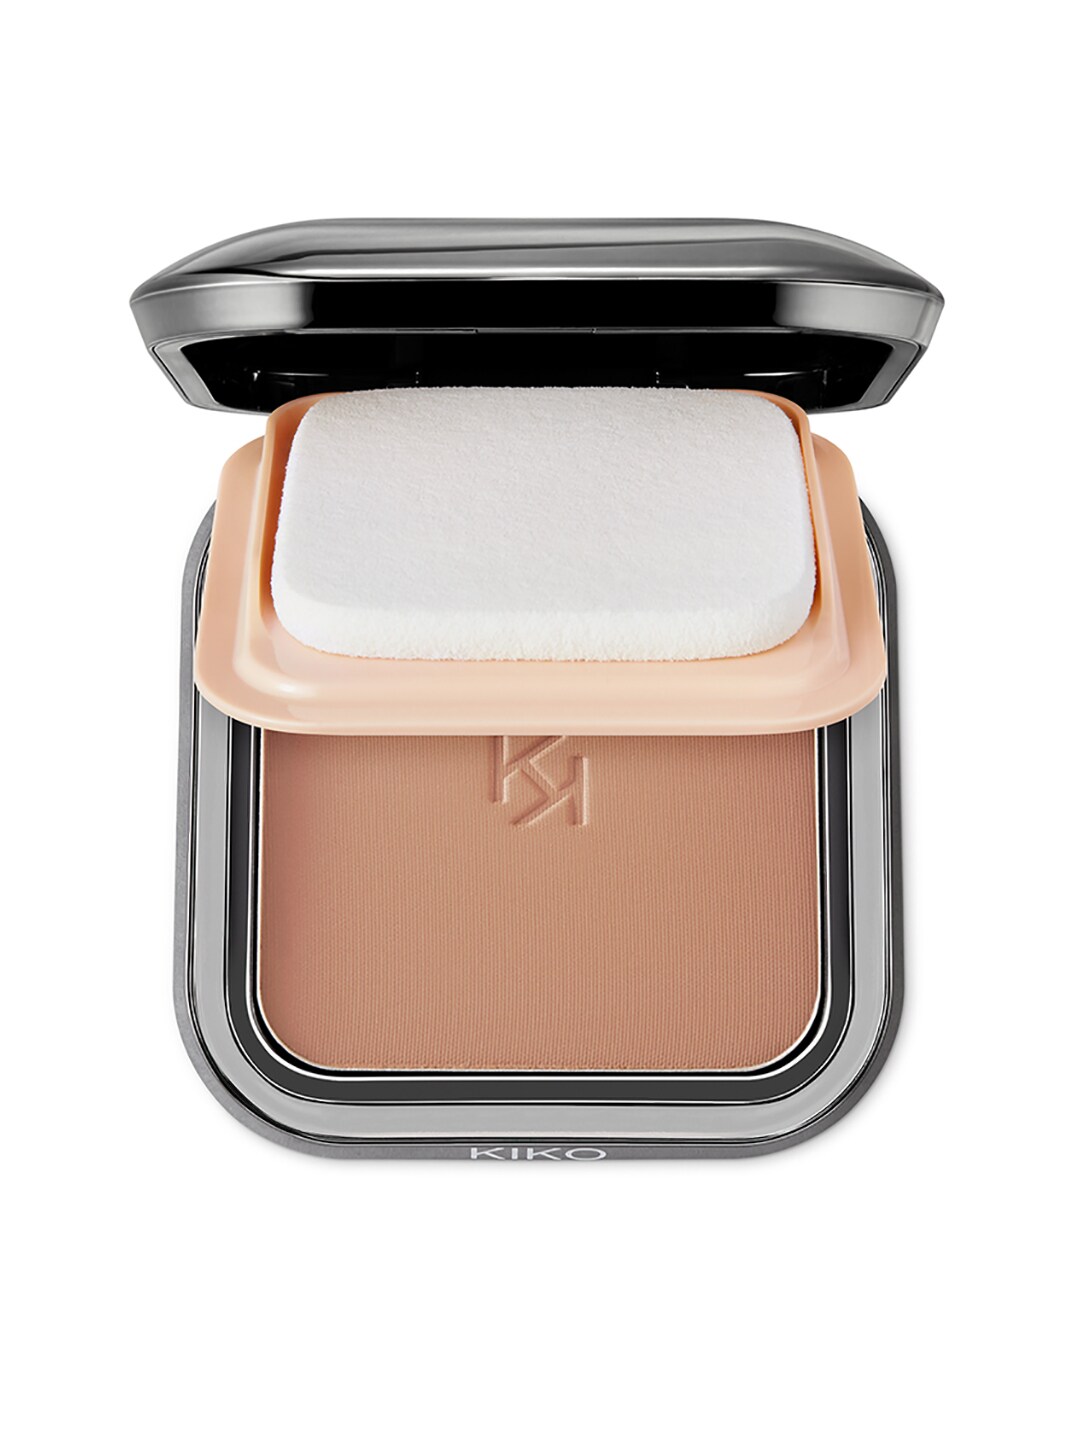 KIKO MILANO Weightless Perfection SPF 30 Wet and Dry Powder Foundation N160 Price in India